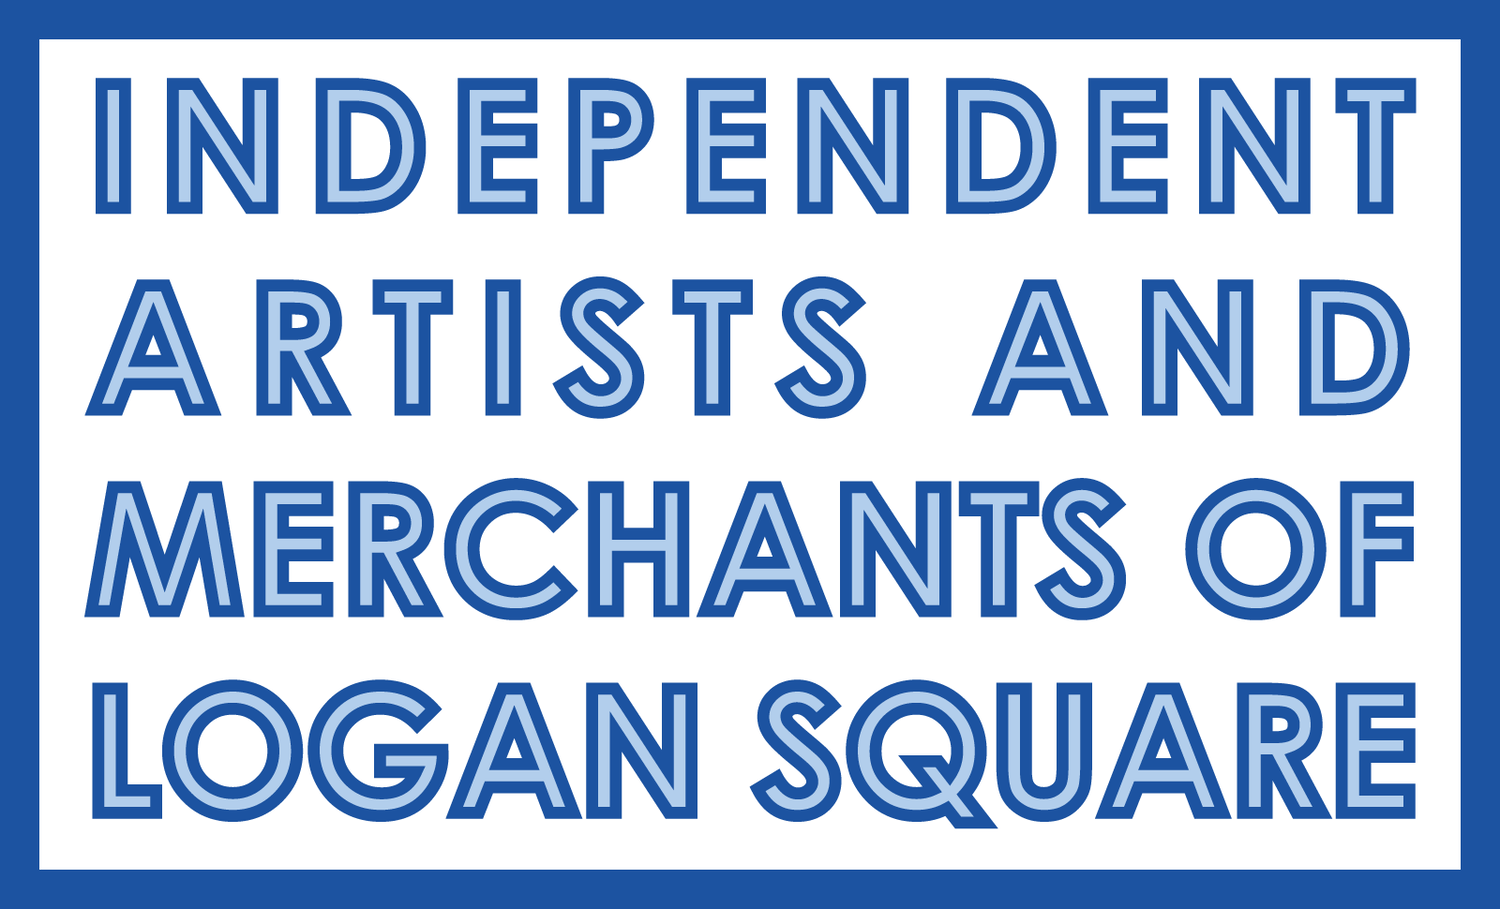 Independant Artists and Merchants of Logan Square